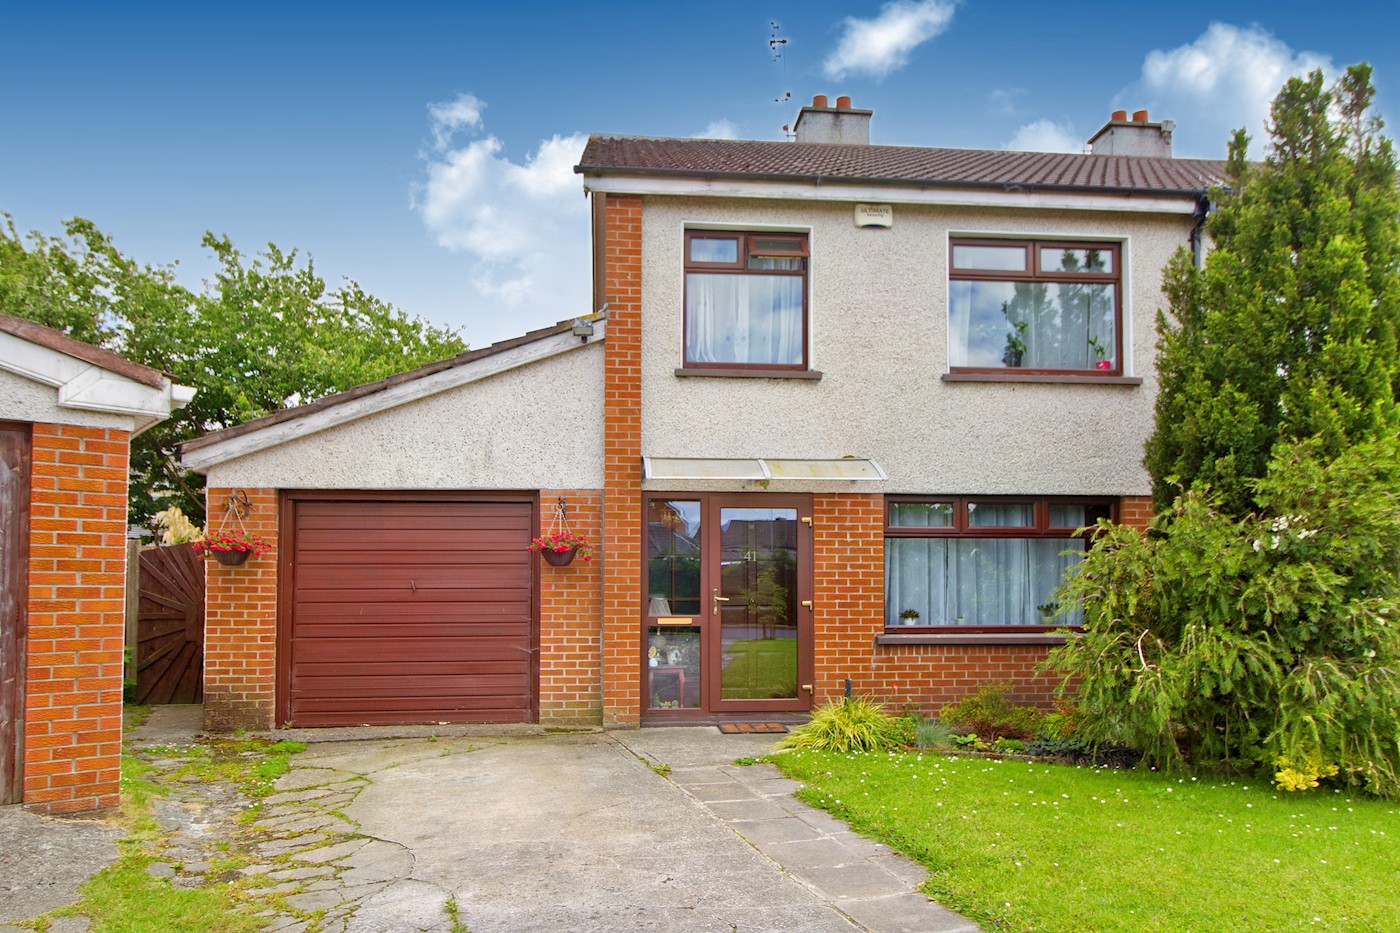 41 Meadow View, Avondale Park, Dundalk, Co. Louth, A91 X8H4 1/10